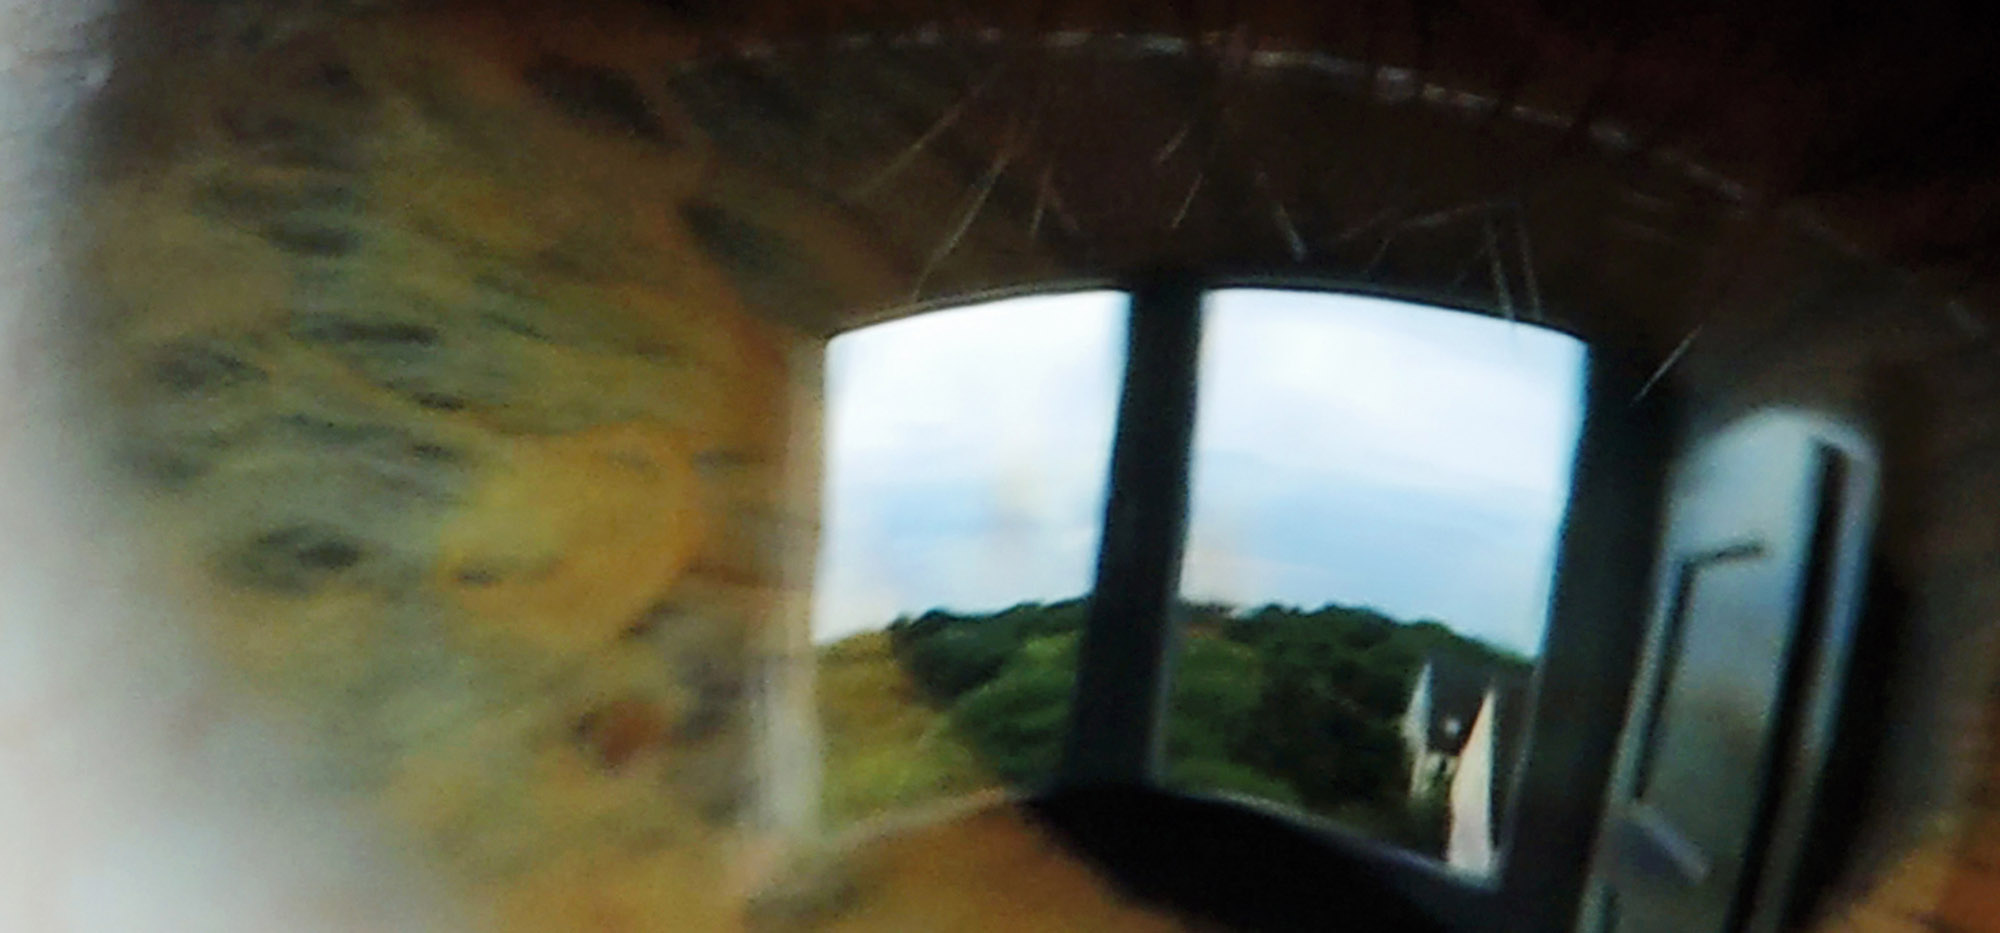 Eyescapes – By the Window (picture detail) · 2020, video still